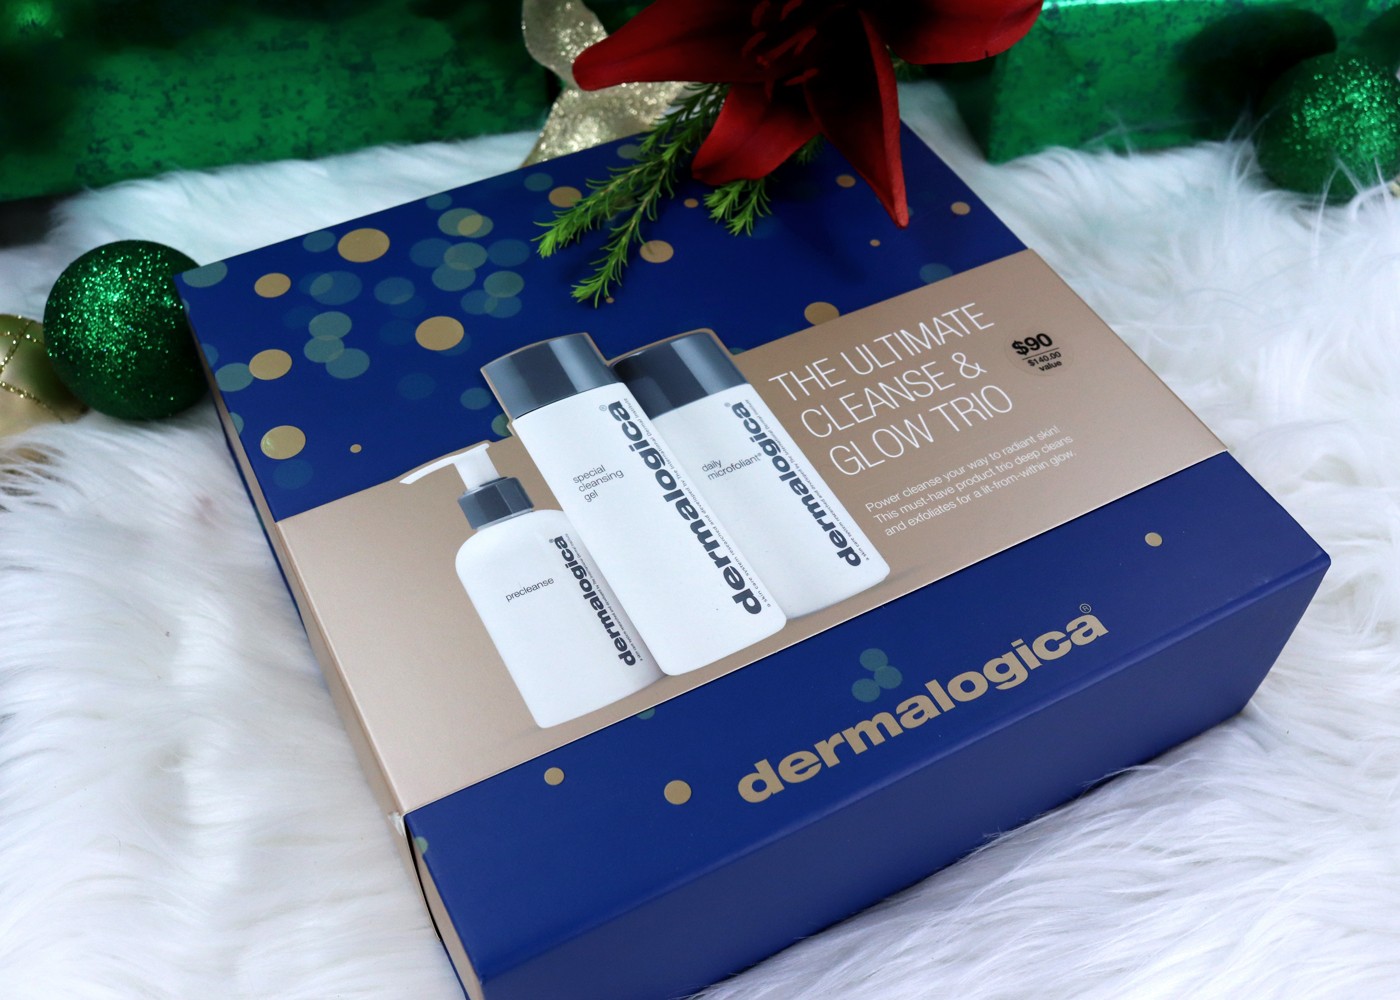 Cruelty Free Holiday Gift Guide - Dermalogica Ultimate Cleanse and Glow Gift Set